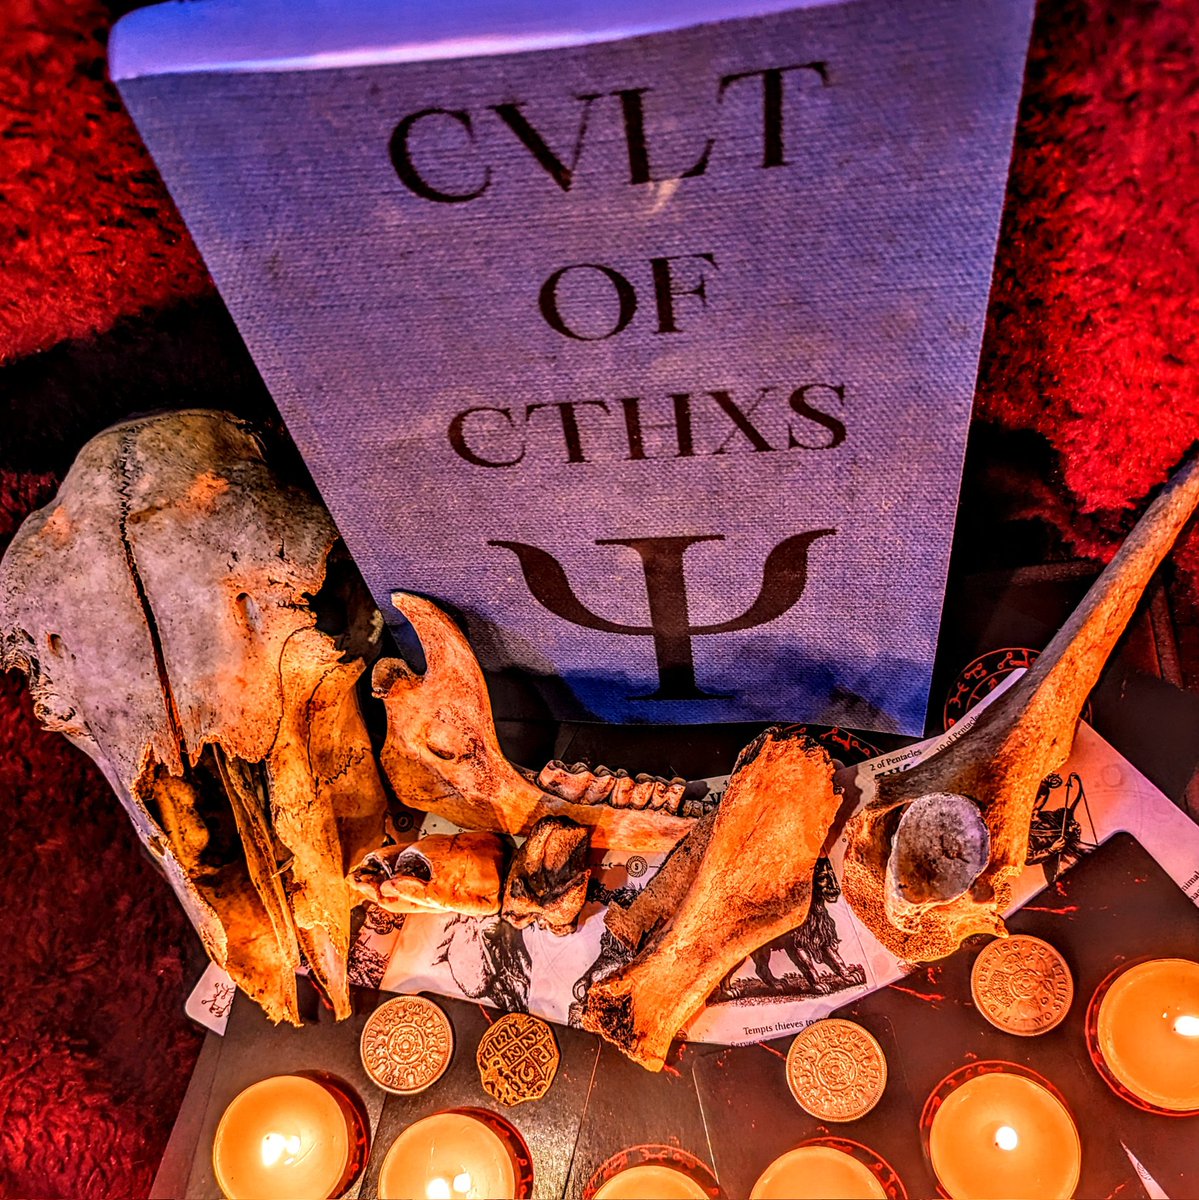 Go give it some love, drop your lowly wordmonger a nice review eh? 
amazon.co.uk/CVLT-CTHXS-Bam…
#indiepub #indiewriter #horror #horrorstory #occult #occultfiction #cult #weirdfiction